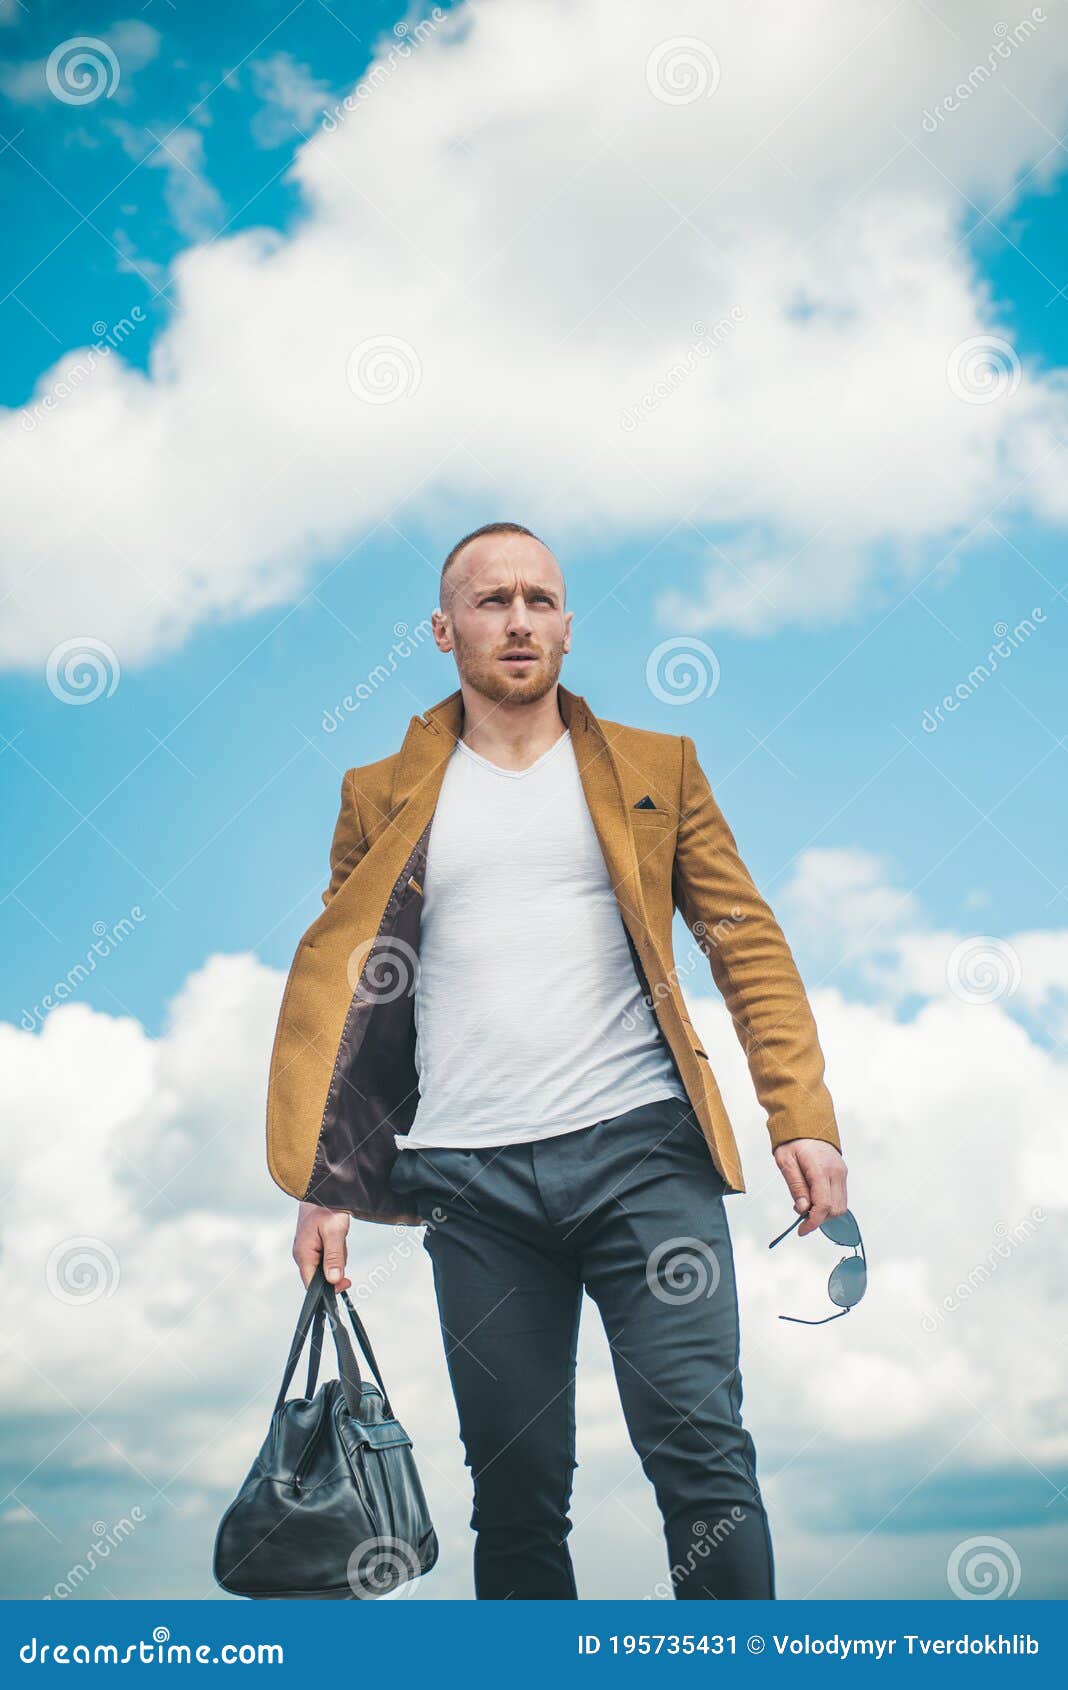 64 522 Outdoor Male Model Photos Free Royalty Free Stock Photos From Dreamstime Sitting on the floor or stairs: dreamstime com